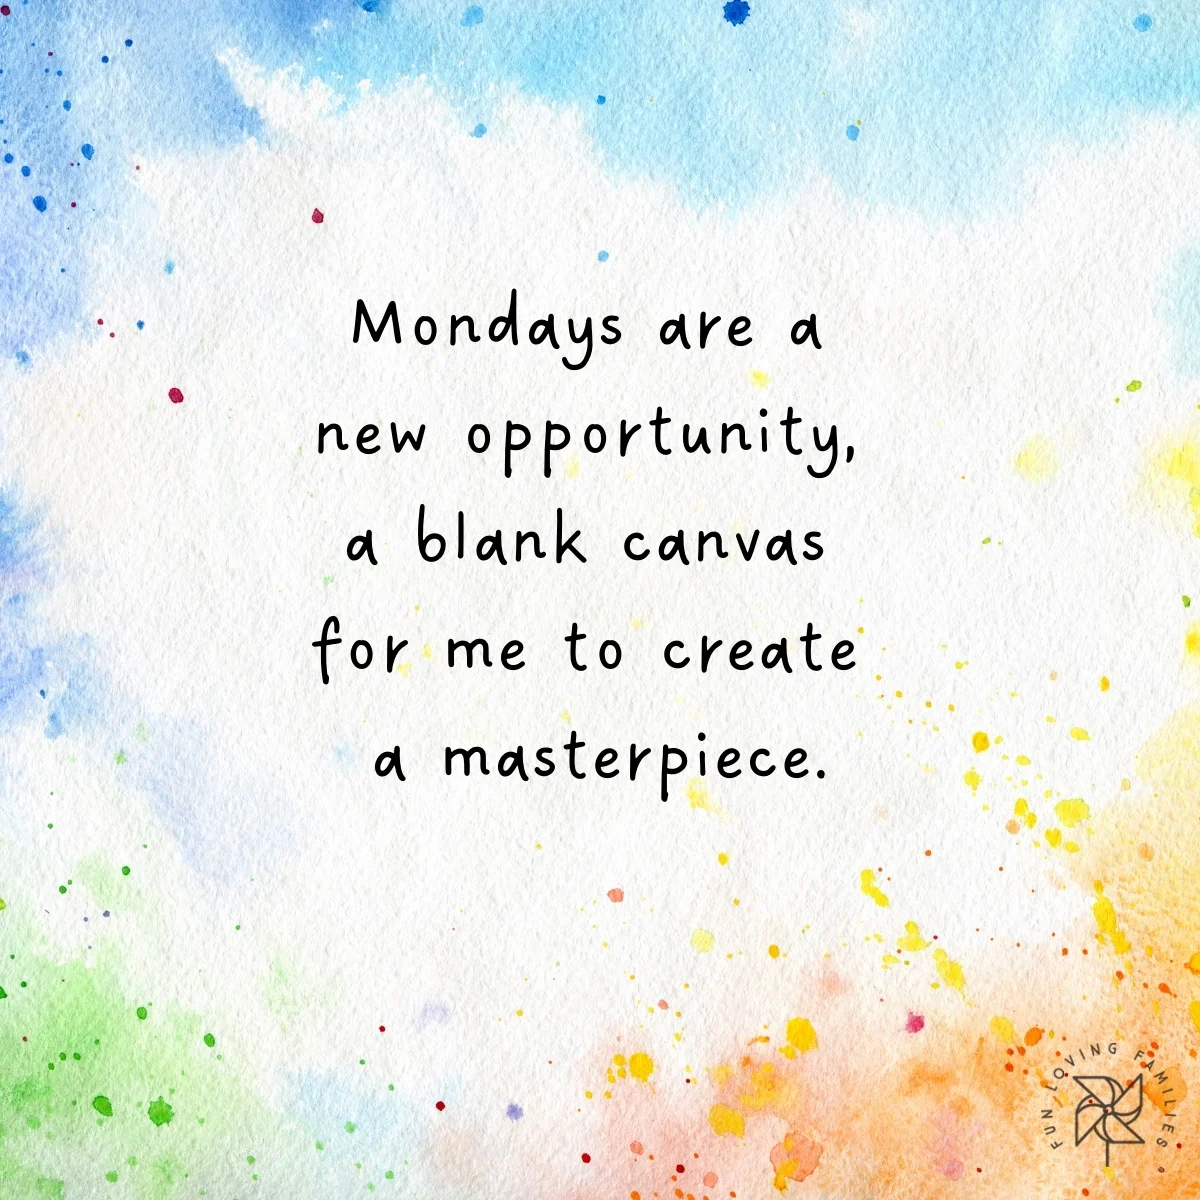 Mondays are a new opportunity affirmation image